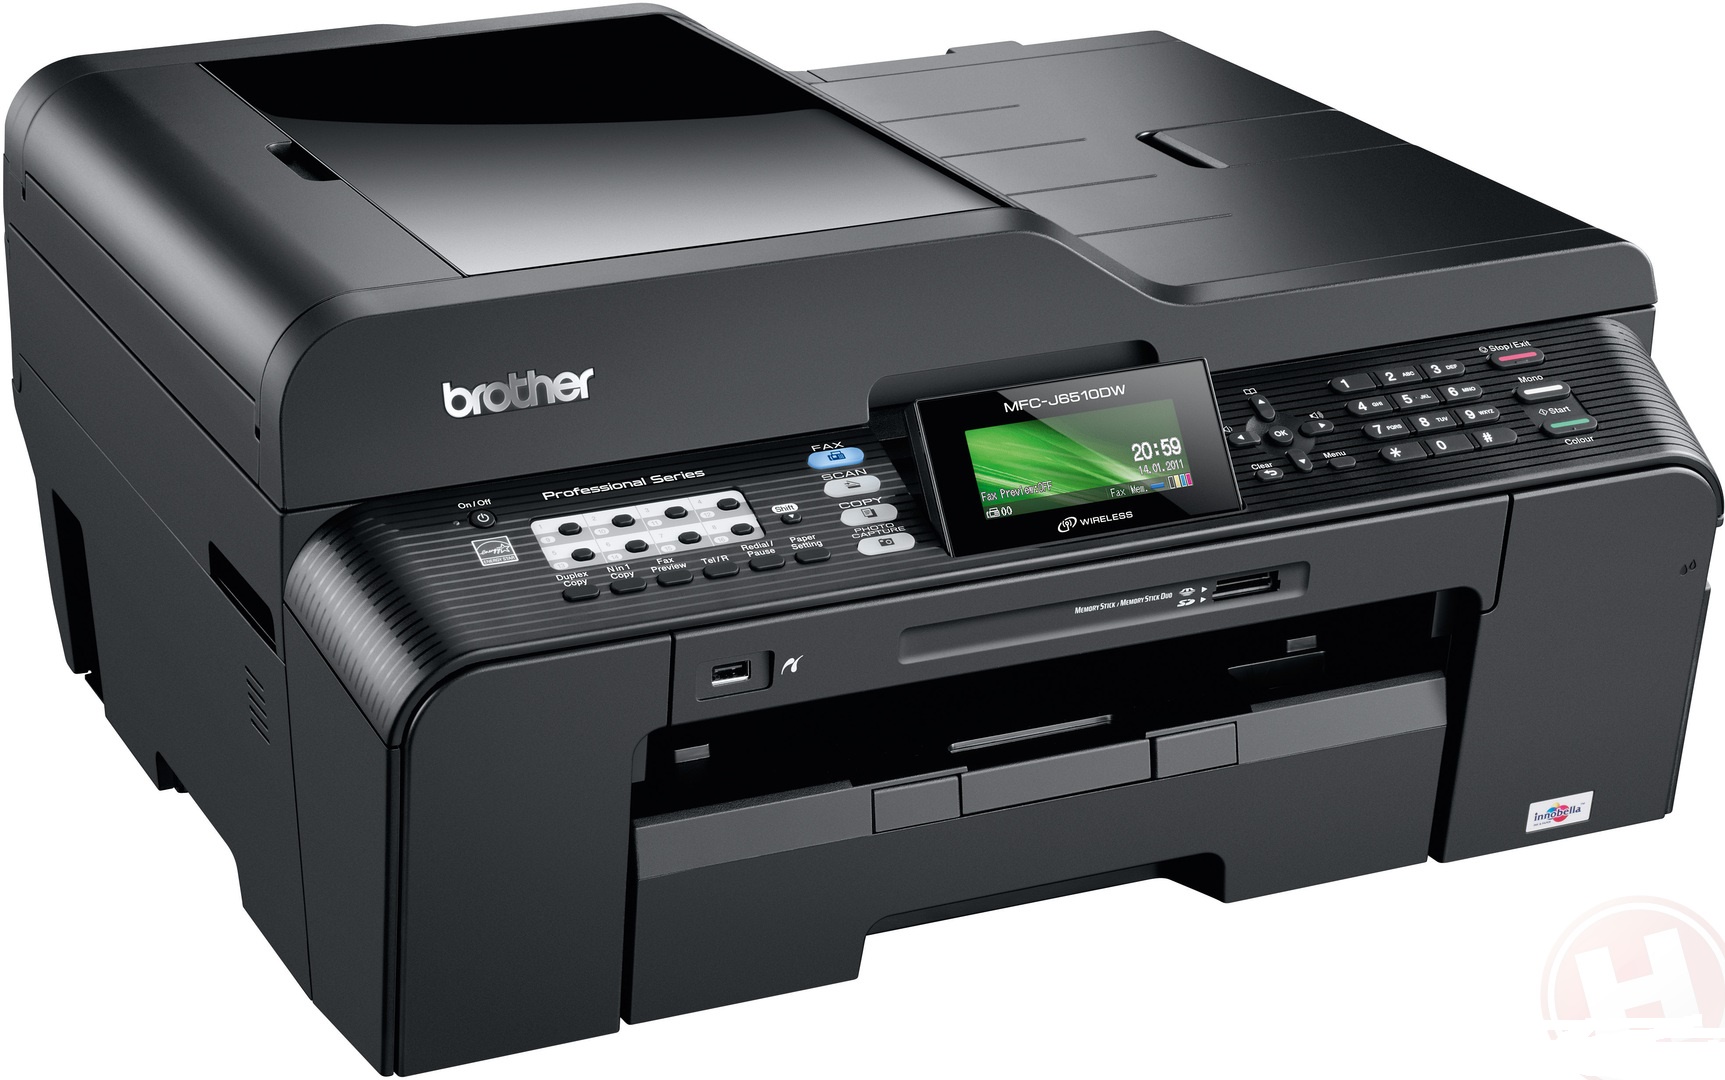 Brother MFC-J6510DW Inkjet All-in-One Printer - CopyFaxes